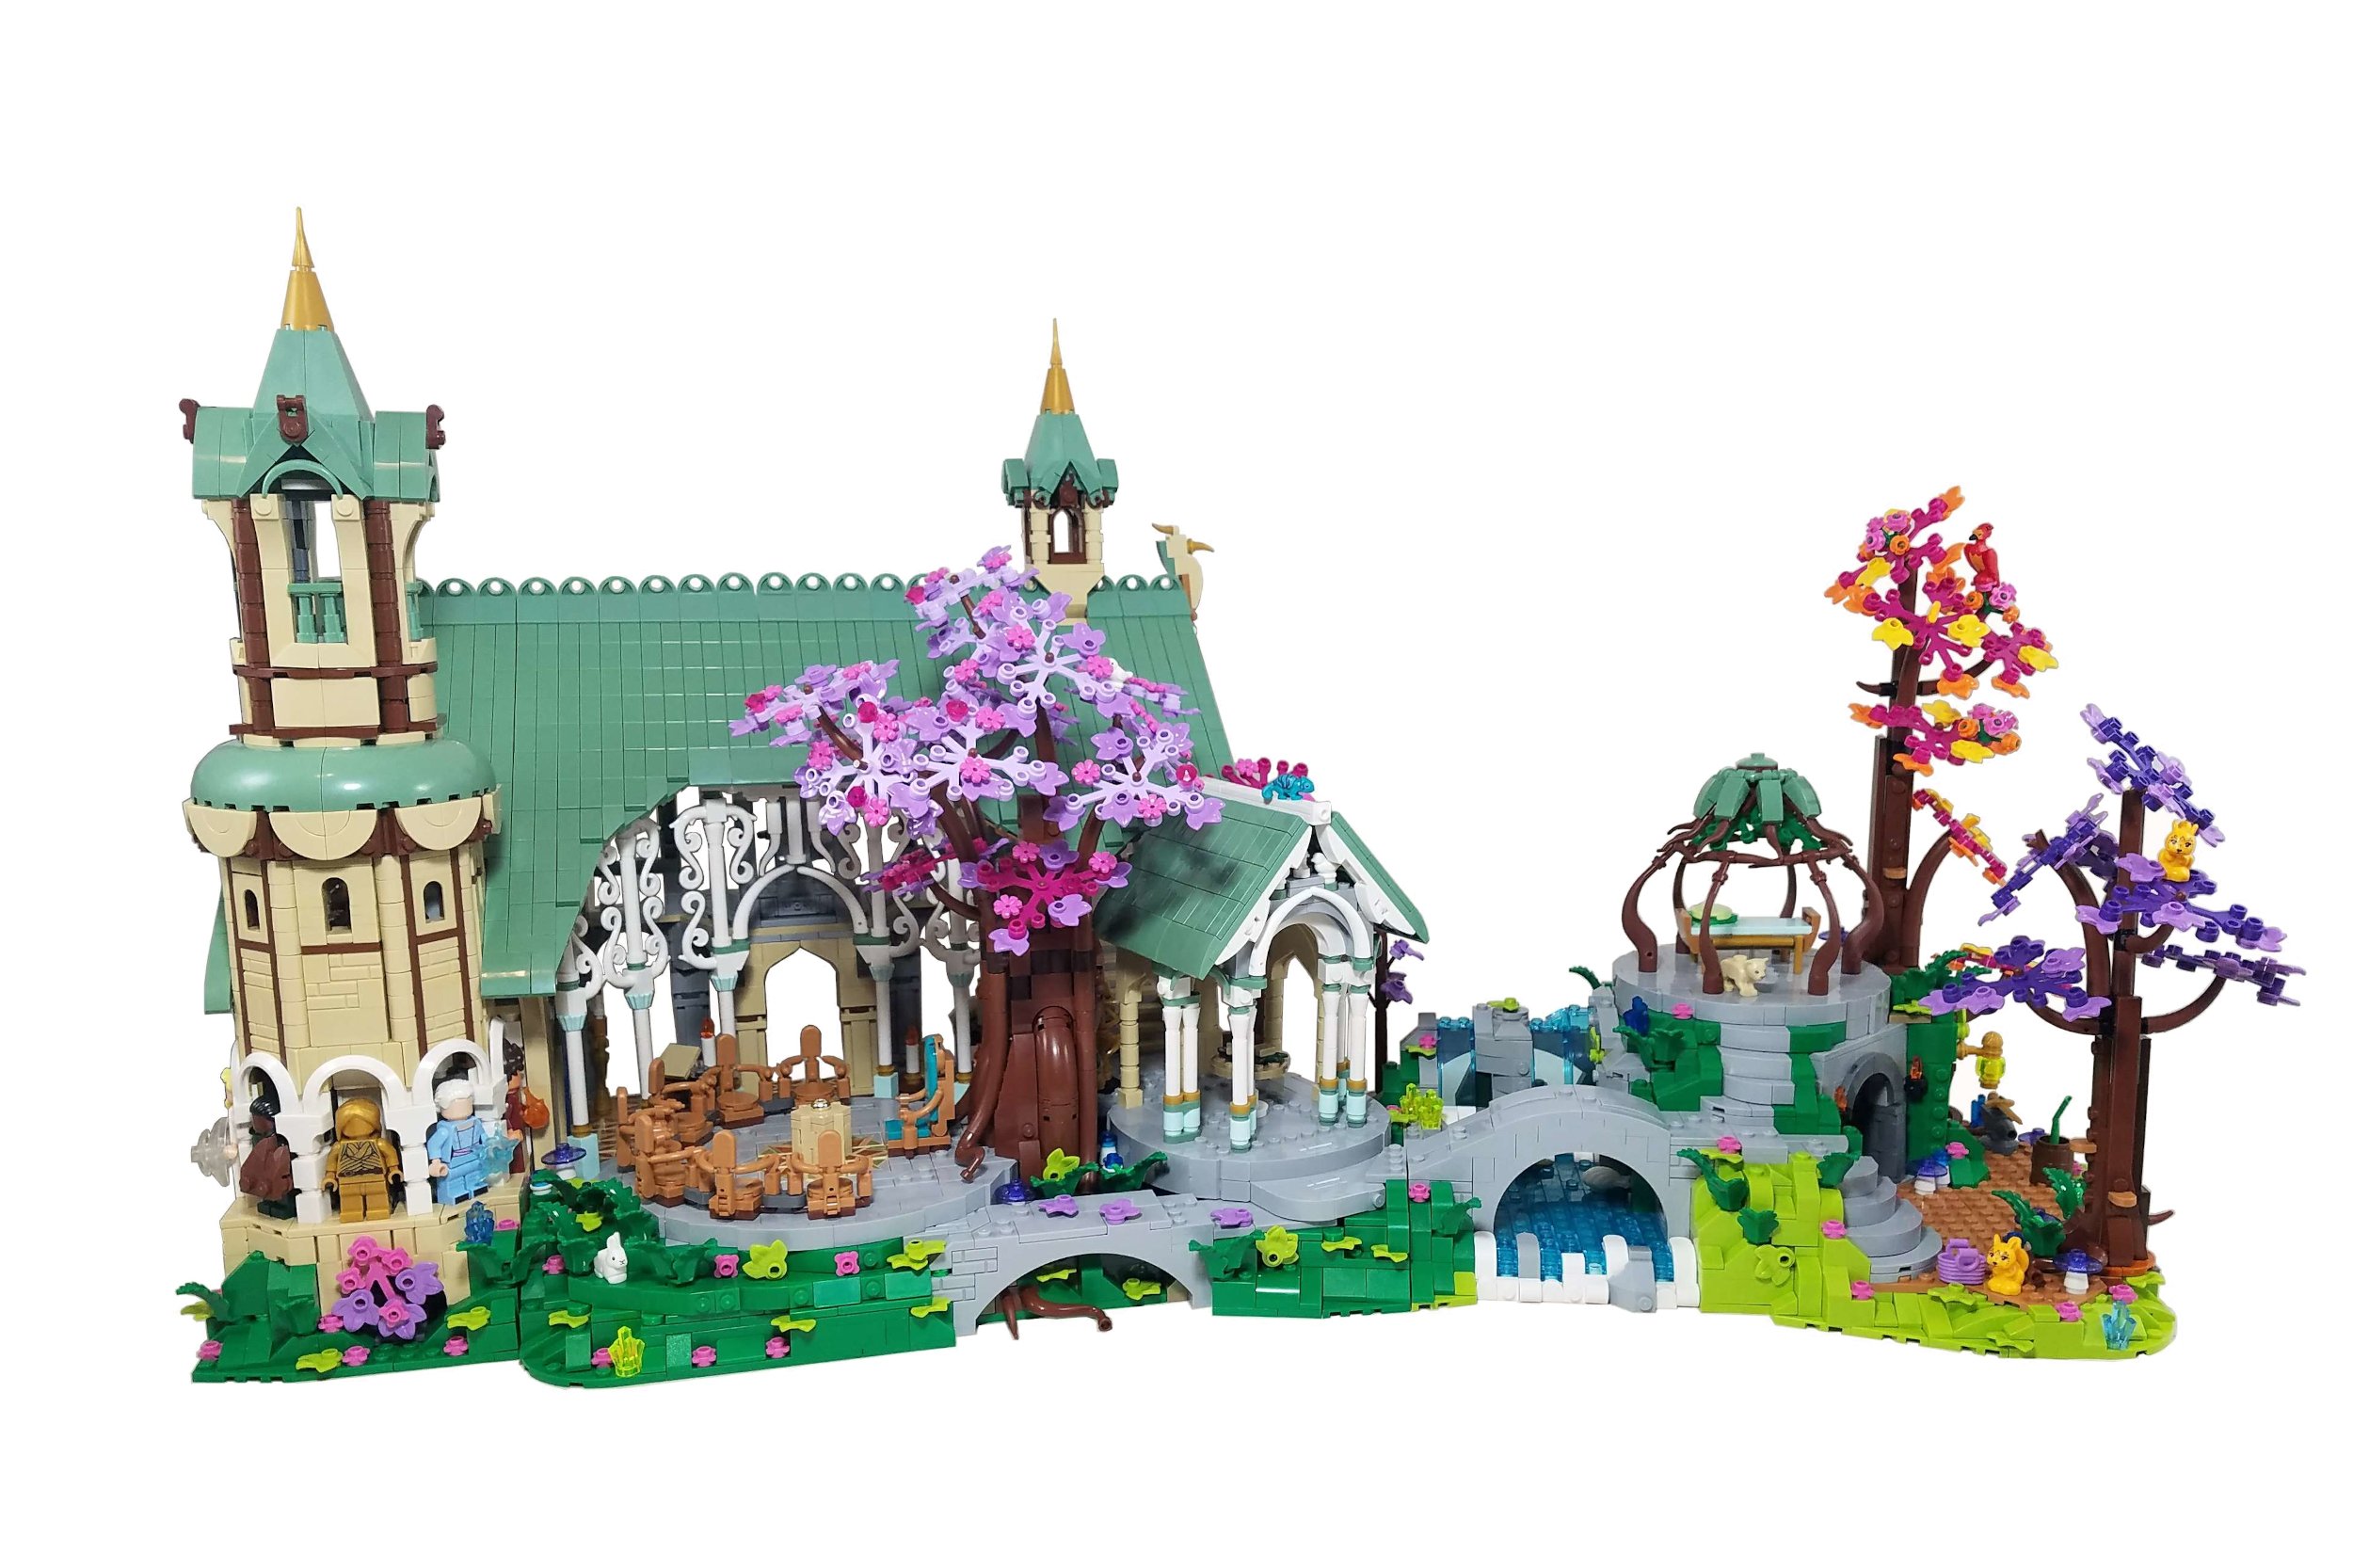 An Ode to Elves: Remaking Rivendell in the Style of LEGO Elves - BrickNerd  - All things LEGO and the LEGO fan community